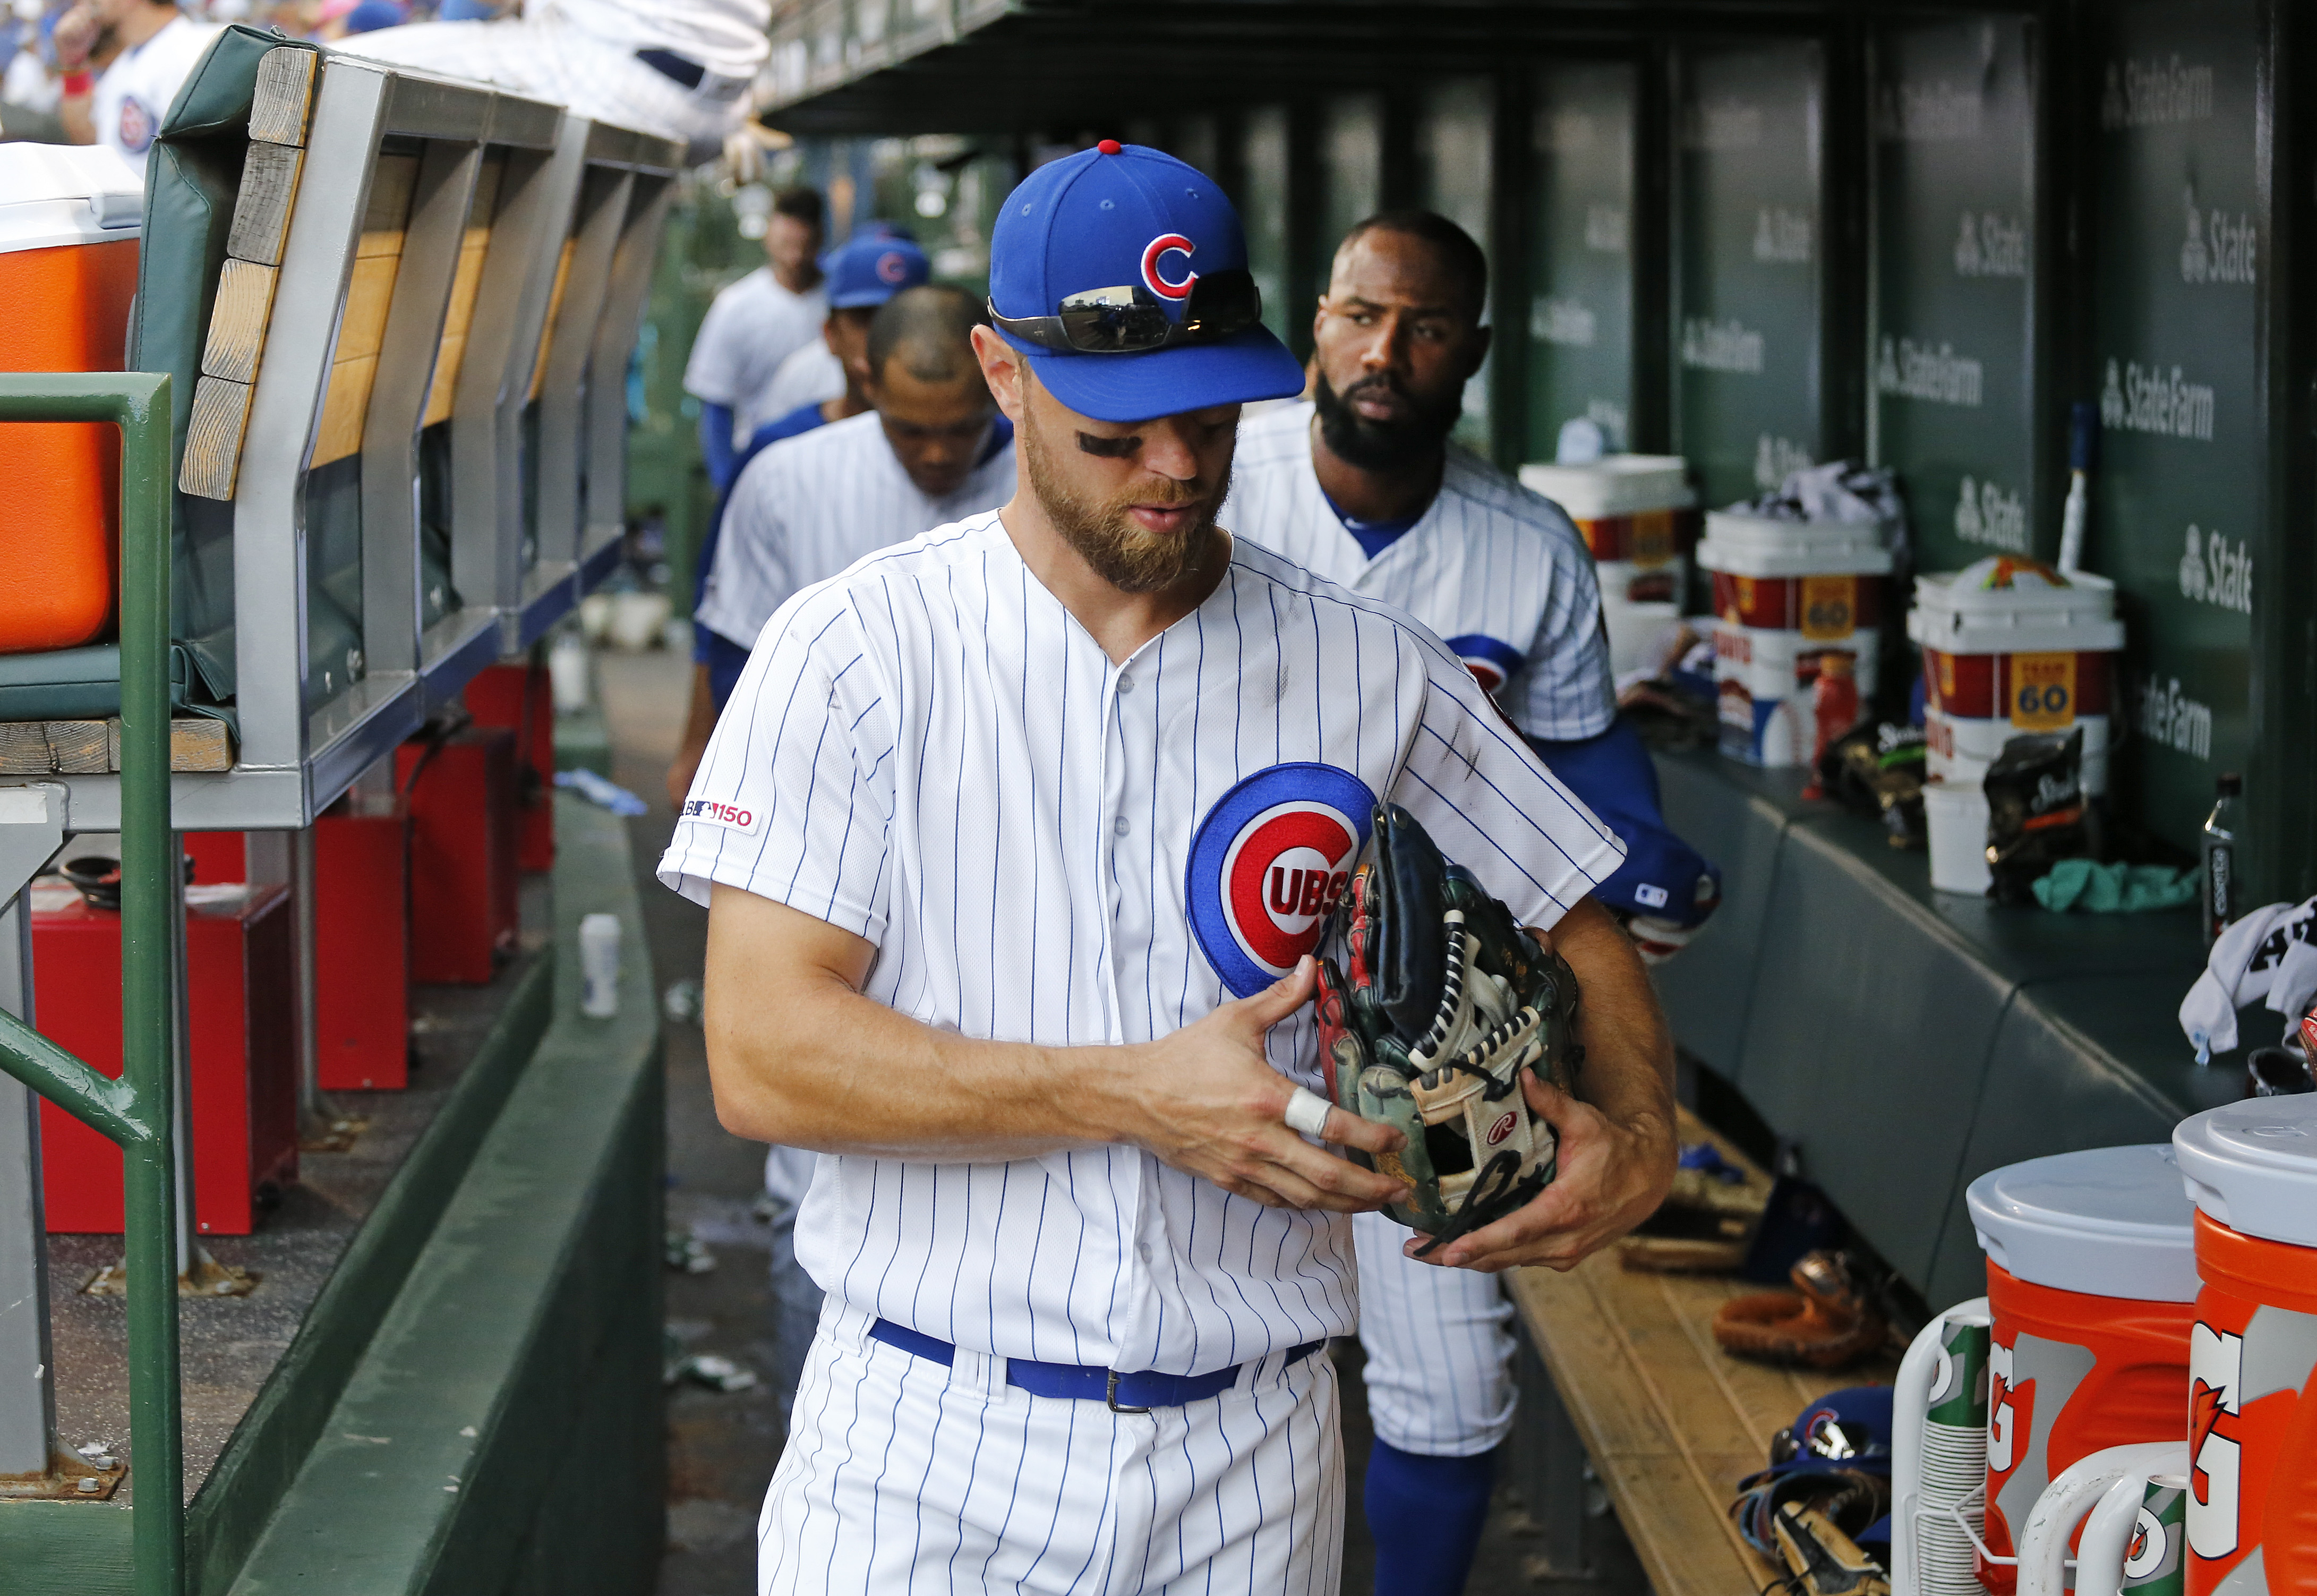 Ex-Cubs player Ben Zobrist's wife and pastor had affair, lawsuit says